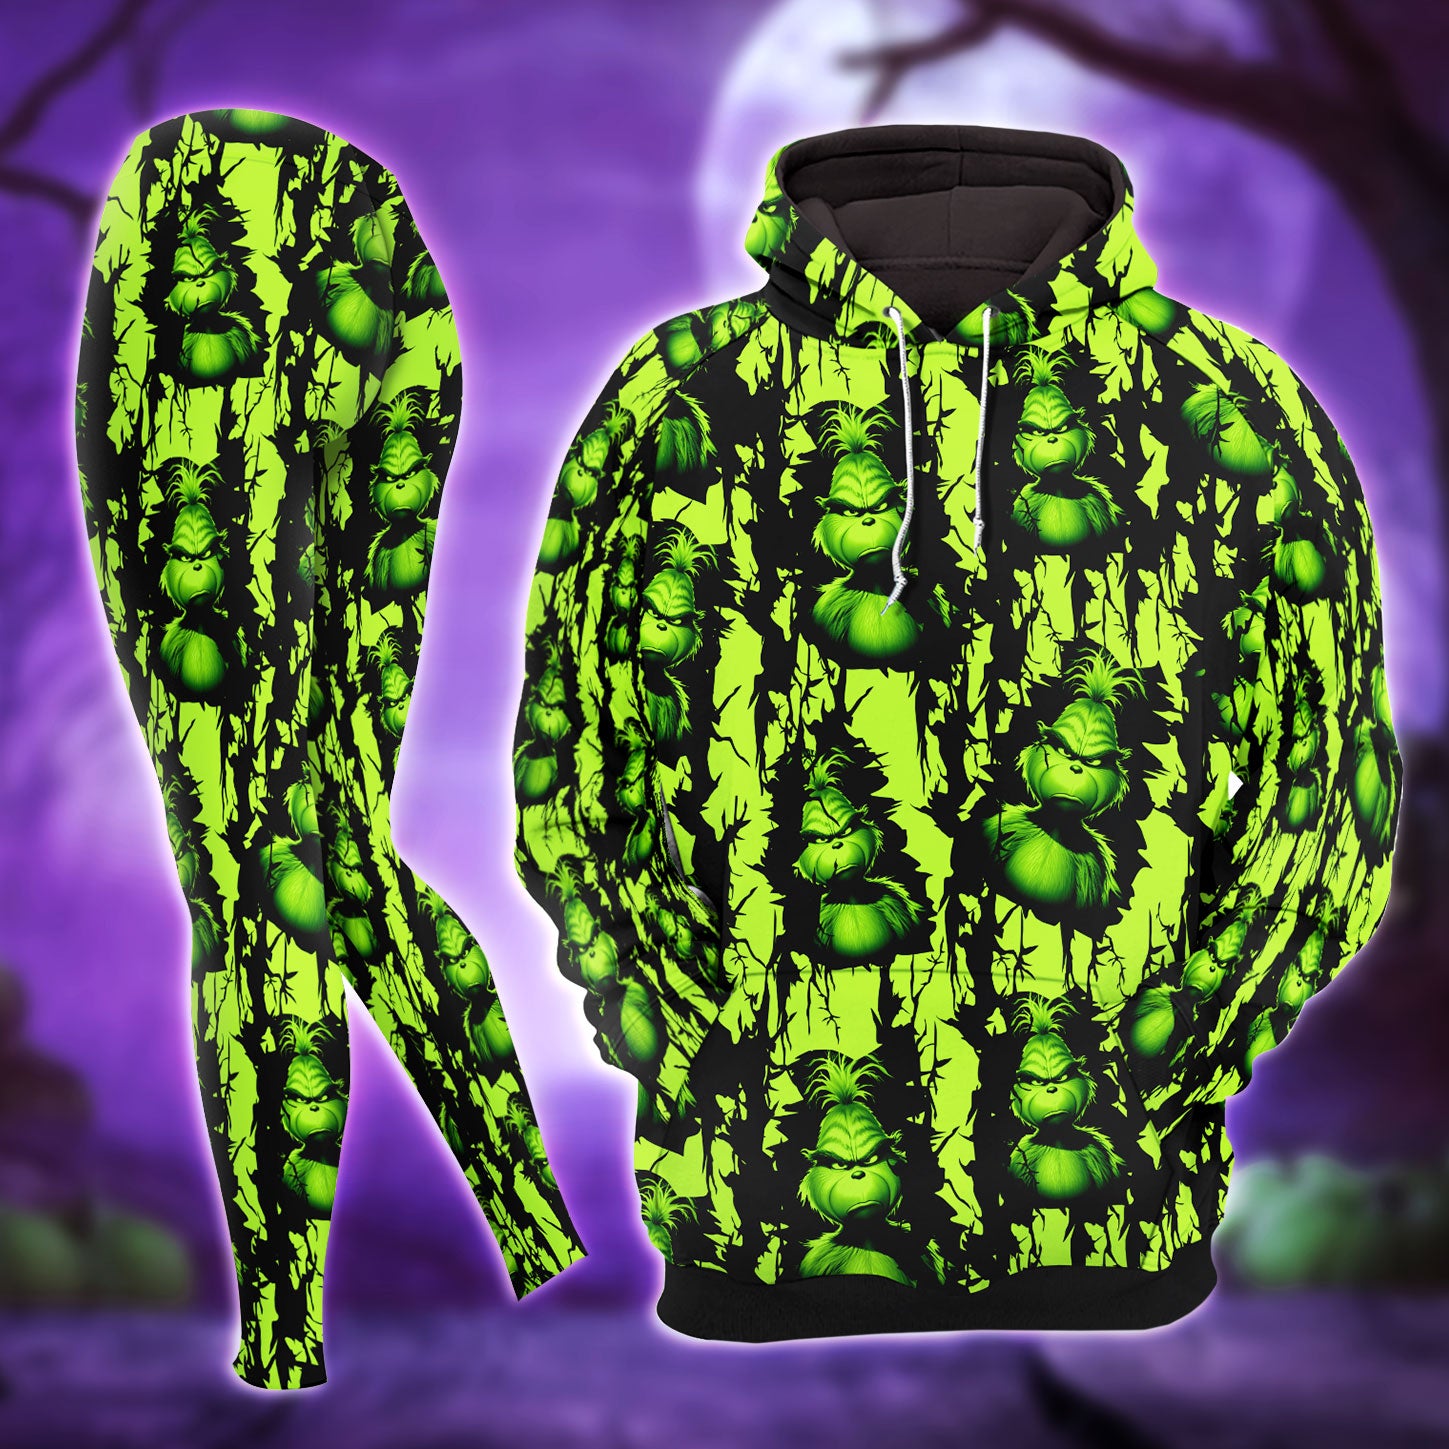 Green Nightmare Art Theme Combo Hoodie and Leggings - Dark and edgy matching set with skull designs for a unique and stylish look